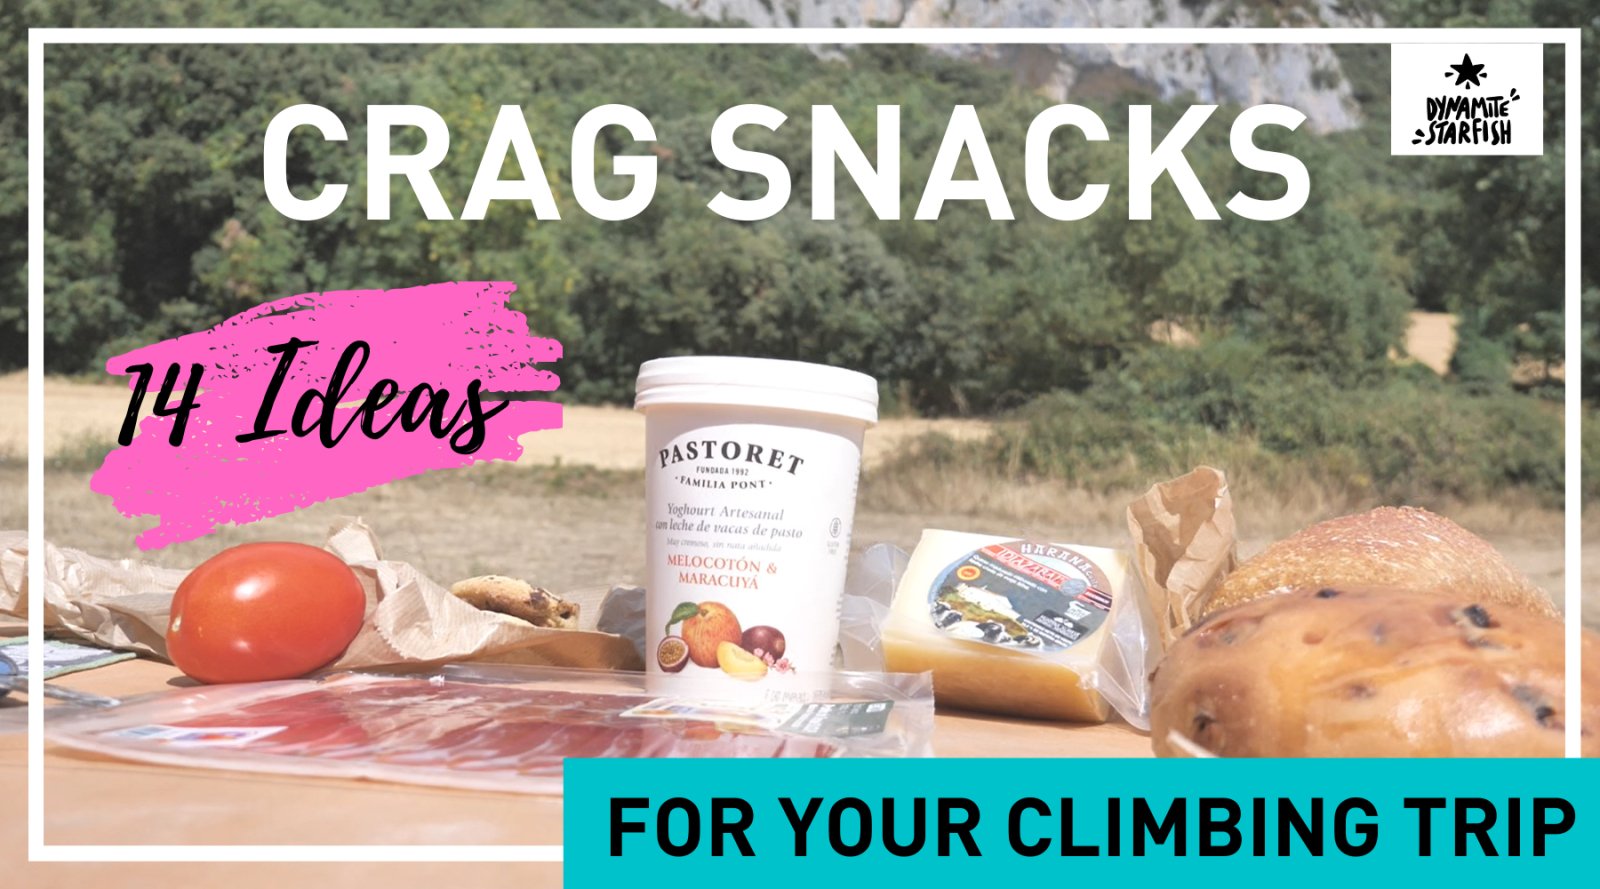 The Best Foods for Rock Climbing: 14 Crag Snack Ideas For Your Next Trip! - Dynamite Starfish